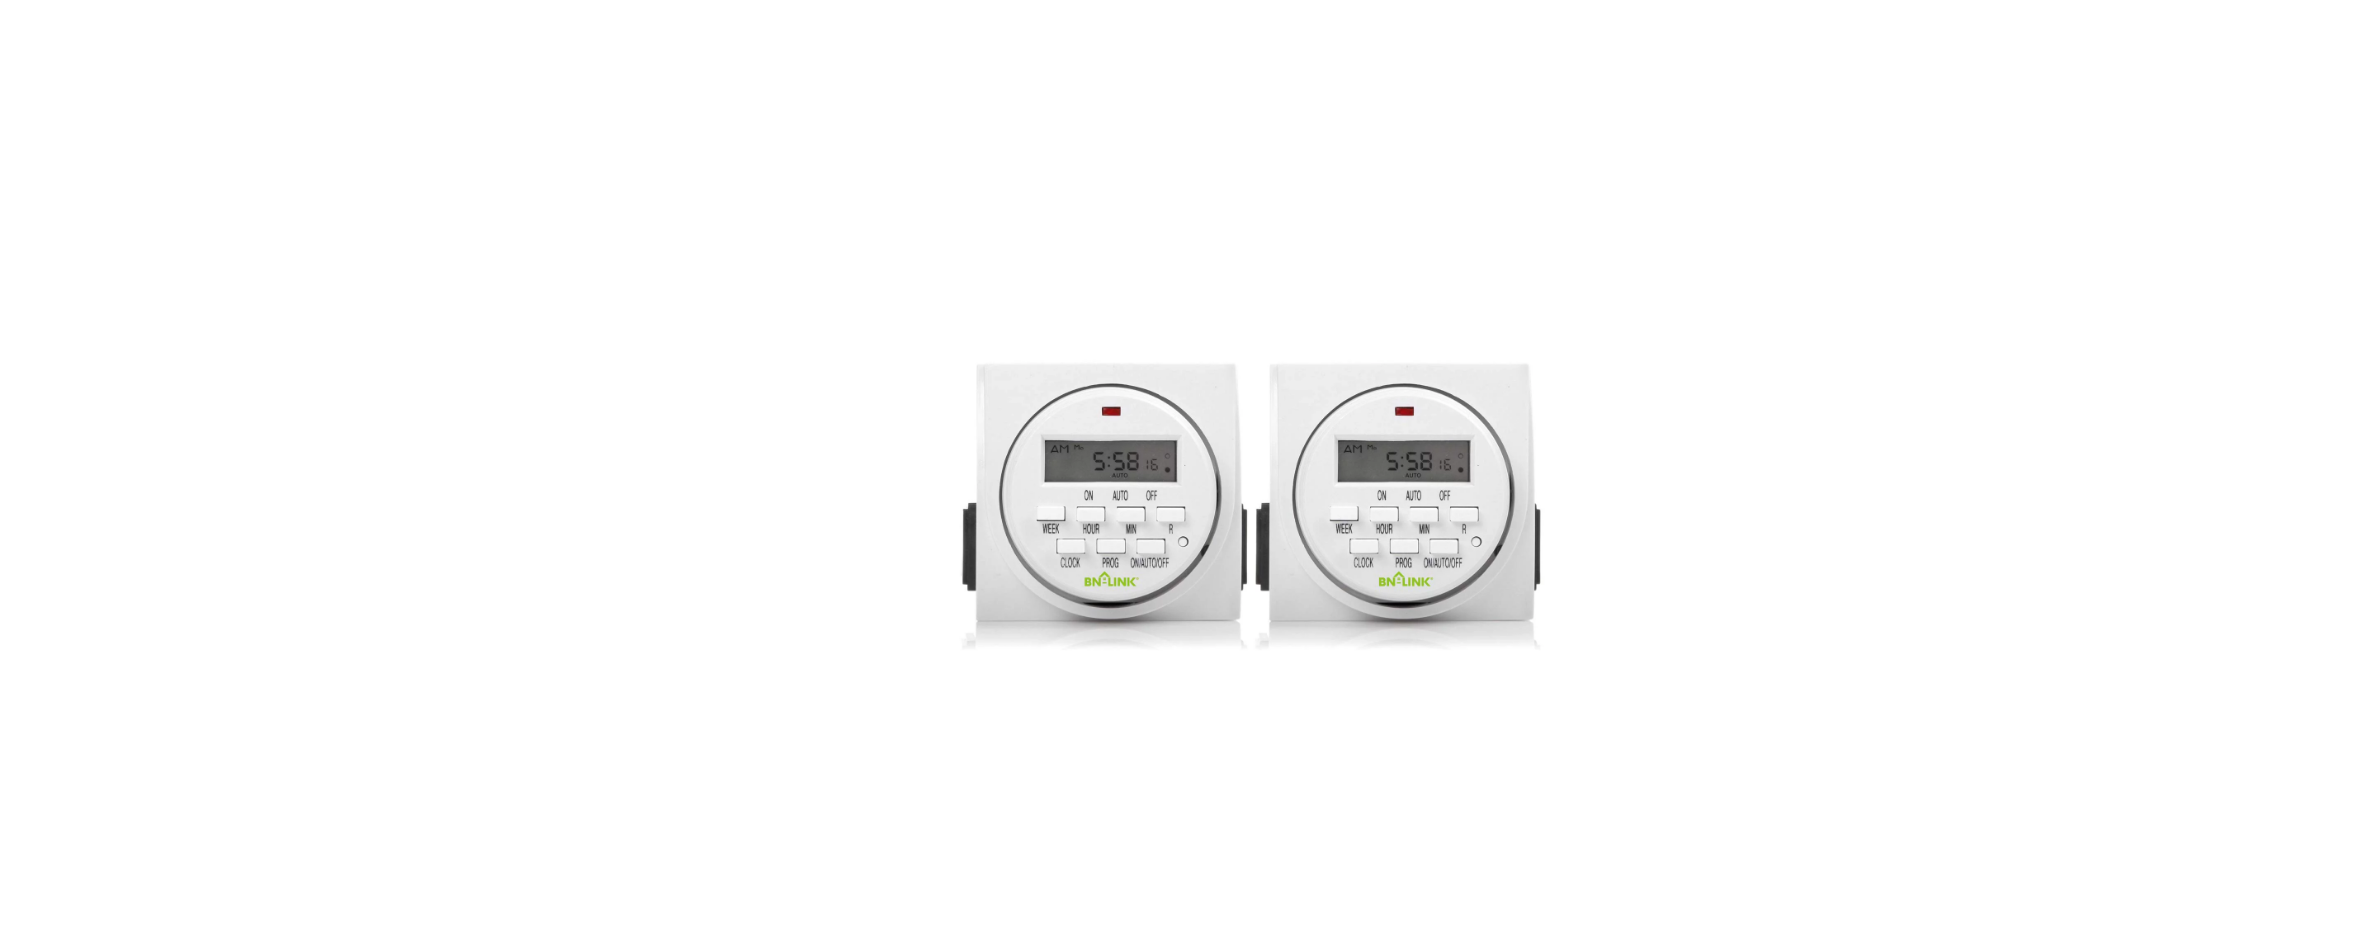 BN-LINK Compact 7 Day Outdoor Mechanical Timer, 24 Hour